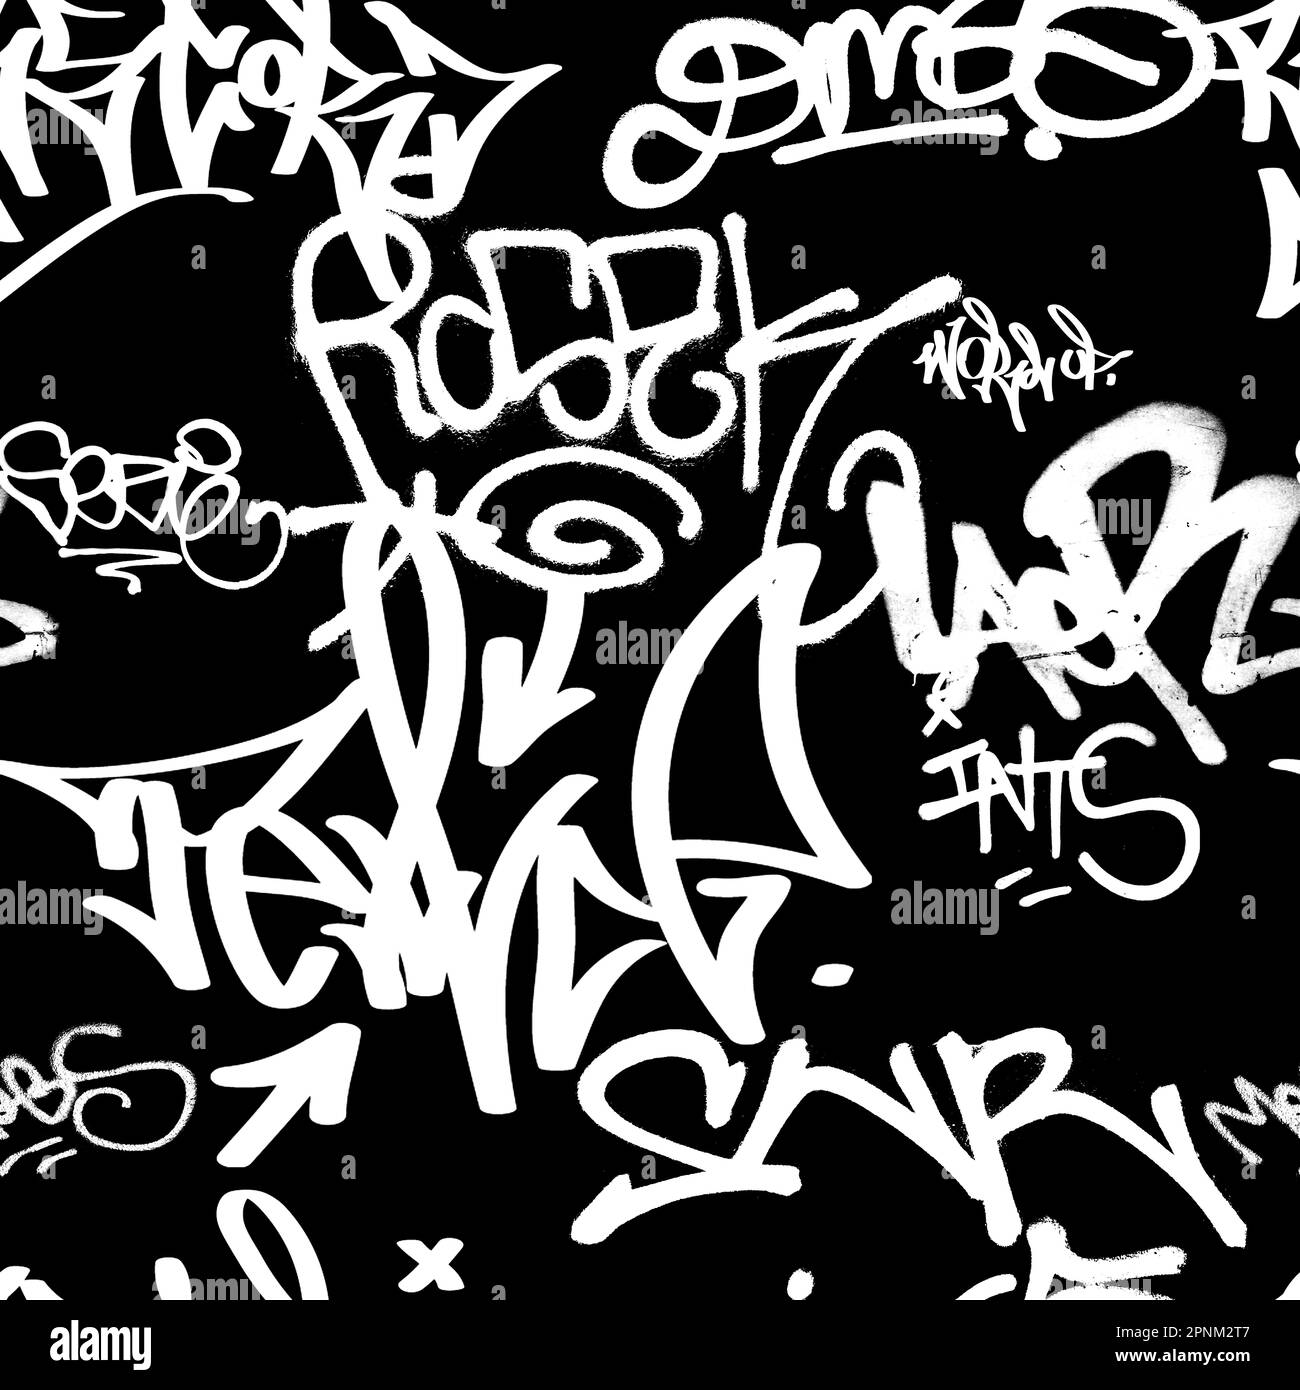 Digital Download - Graffiti Tag Handstyle Lettering - not a font - vector